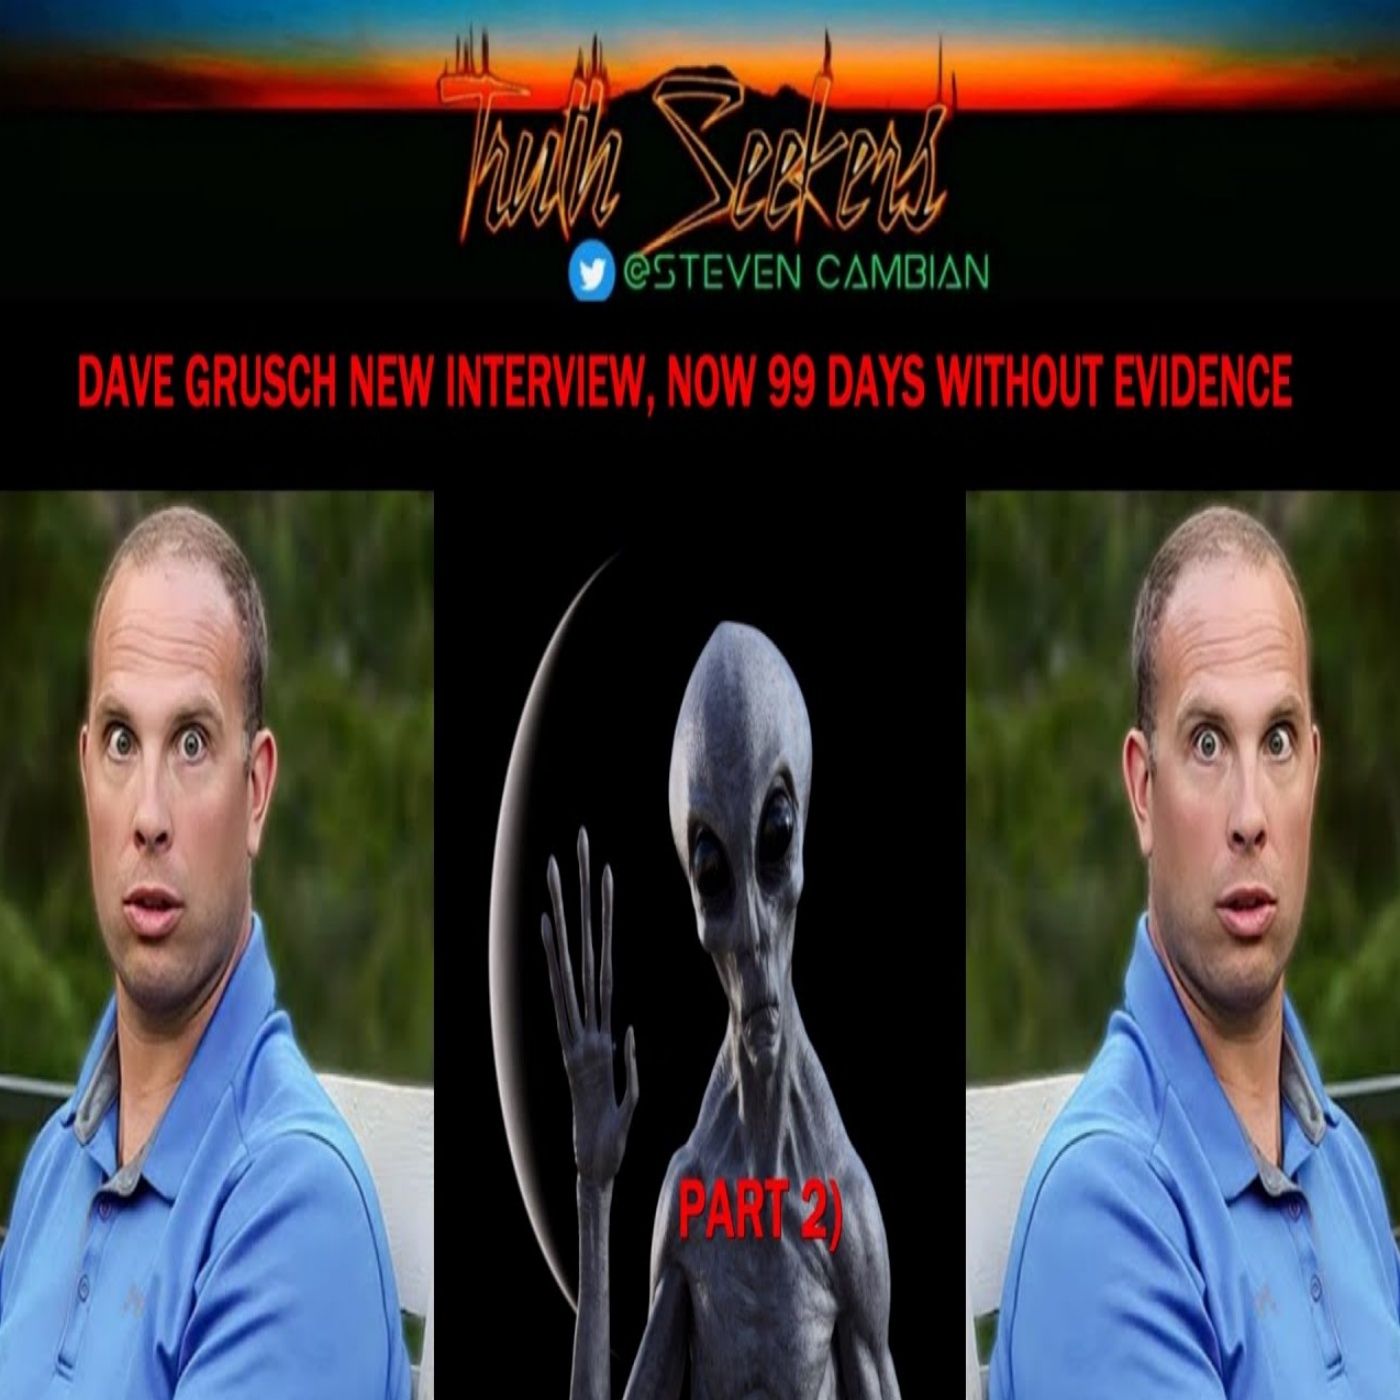 Dave Grusch interview, part 2, now 99 days without evidence!